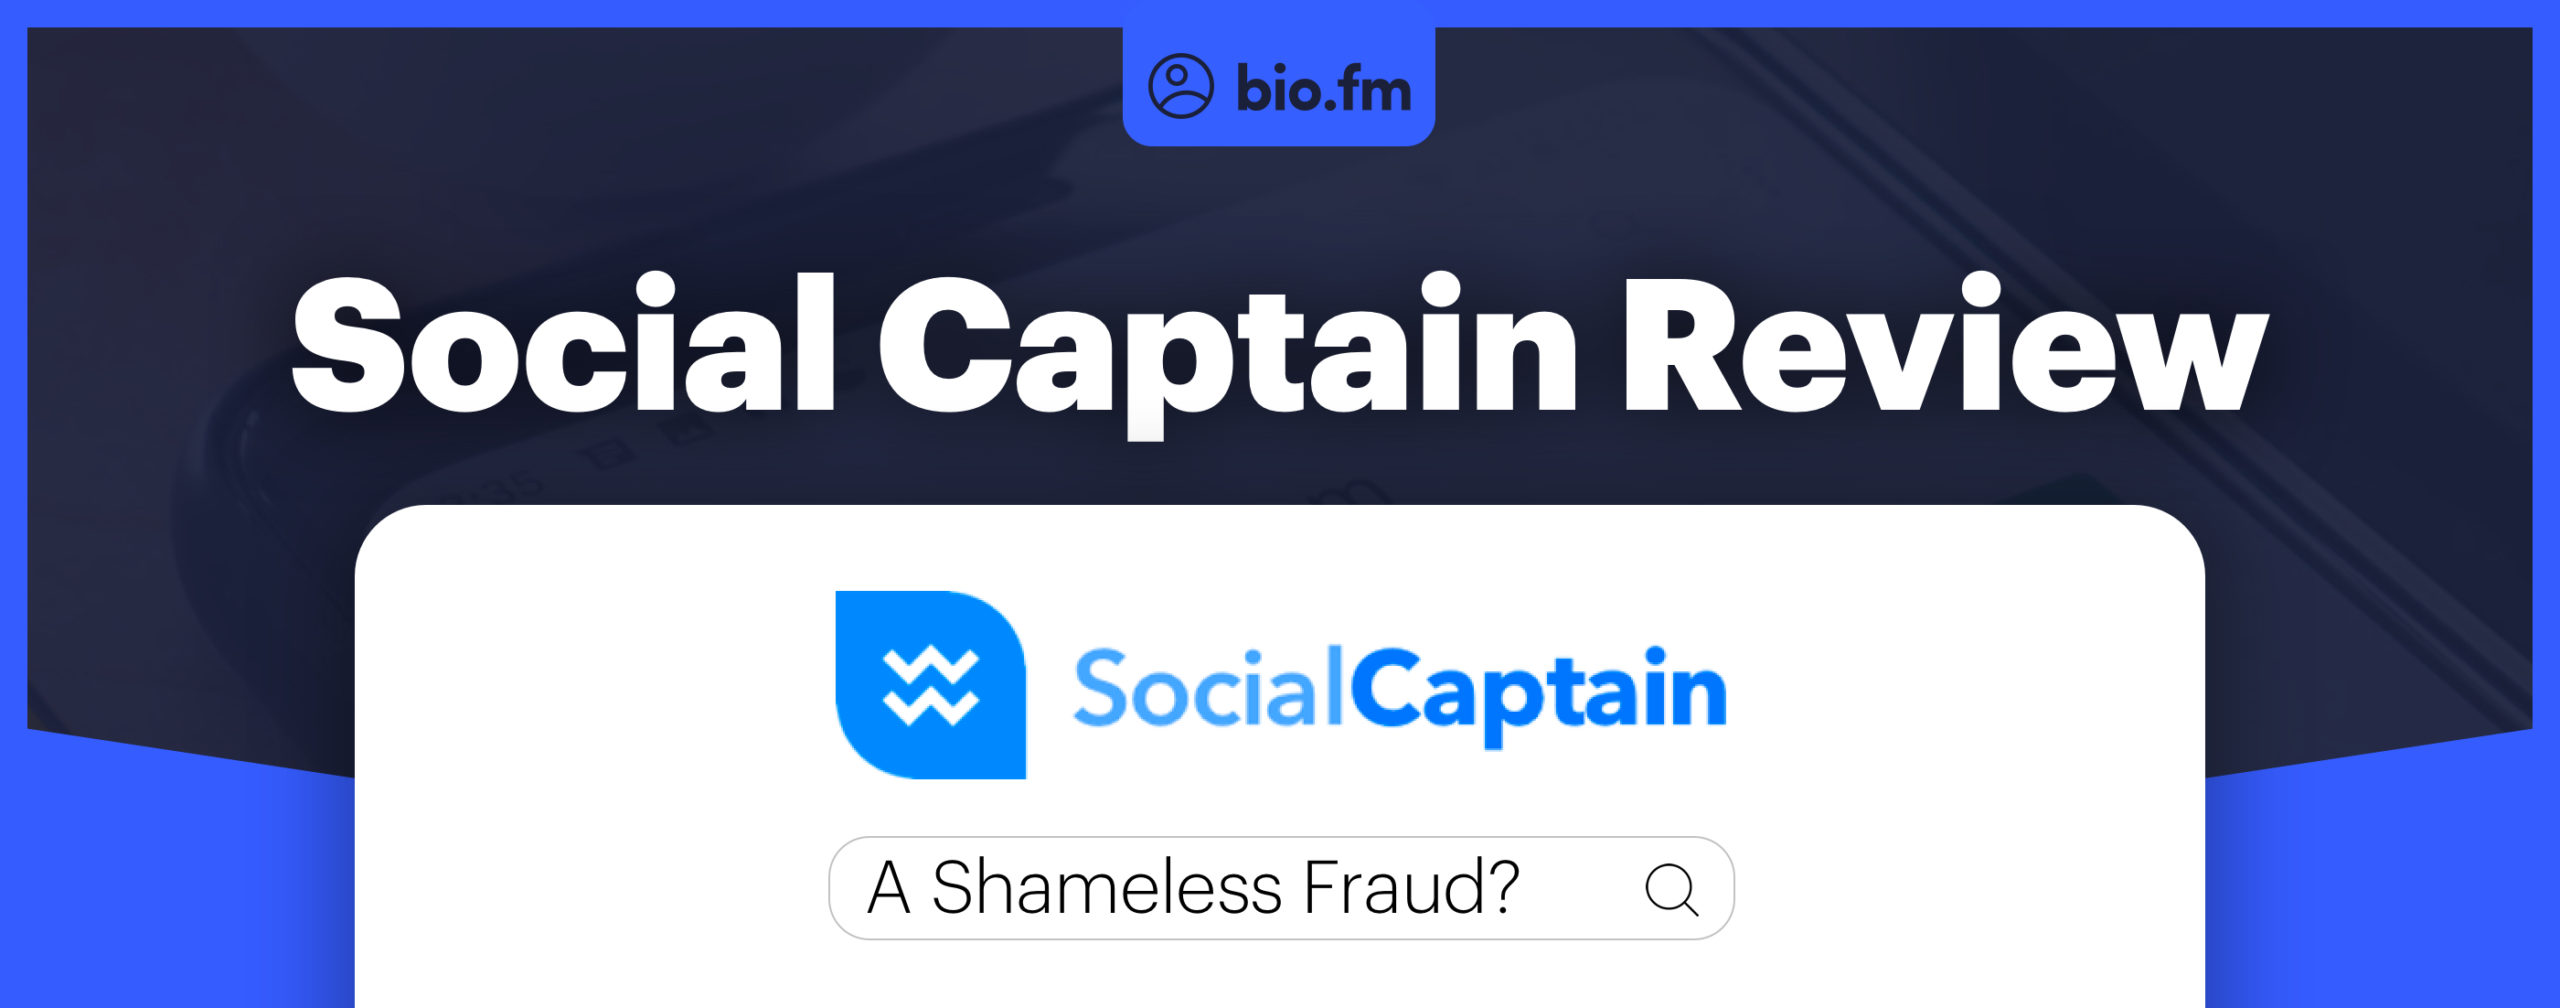 social captain review featured image